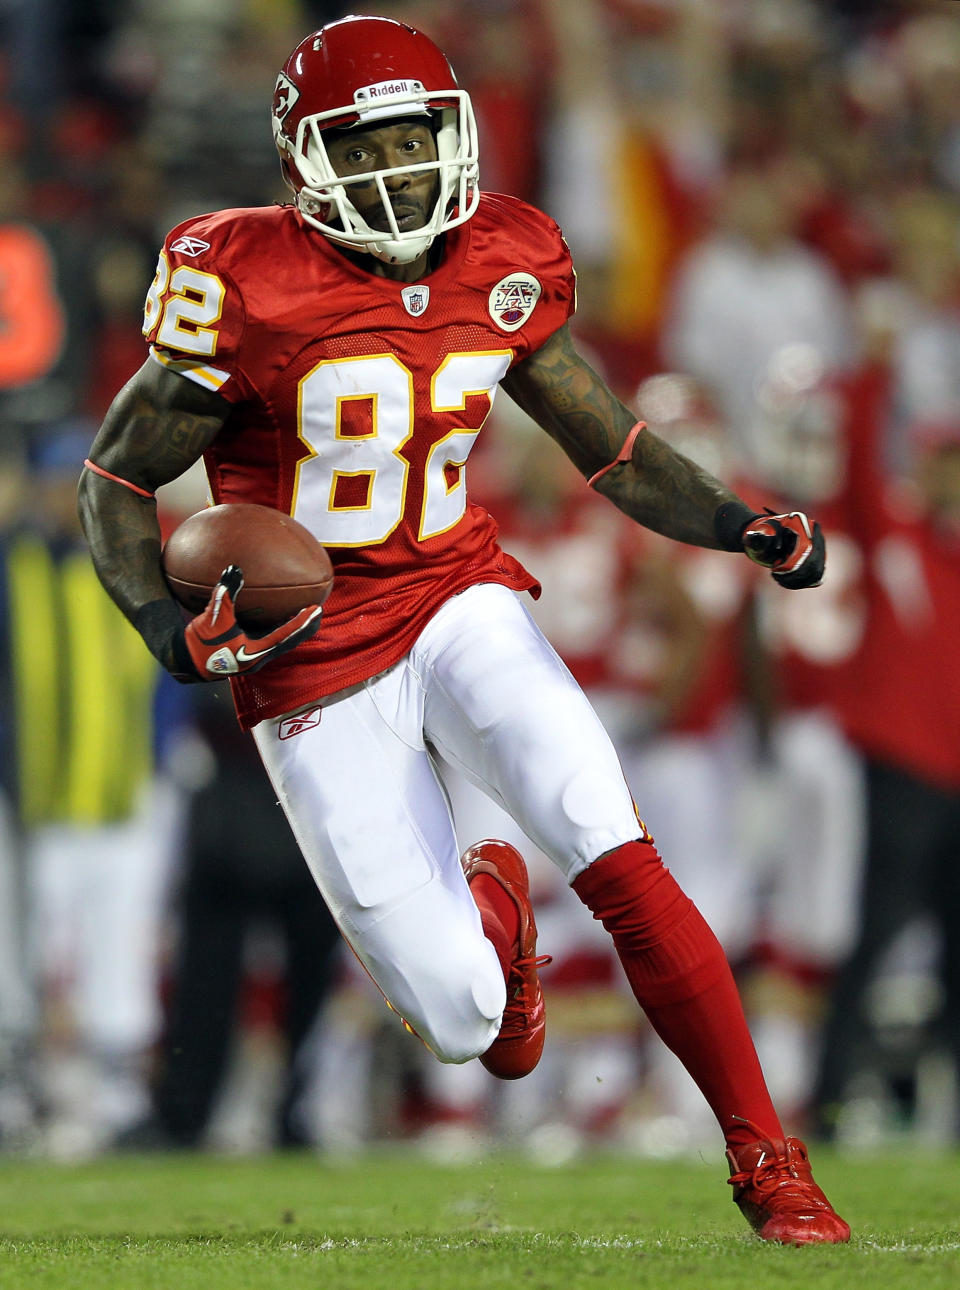 KANSAS CITY, MO - OCTOBER 31: Receiver Dwayne Bowe #82 of the Kansas City Chiefs carries the ball upfield after making a catch during the game against the San Diego Chargers on October 31, 2011 at Arrowhead Stadium in Kansas City, Missouri. (Photo by Jamie Squire/Getty Images)